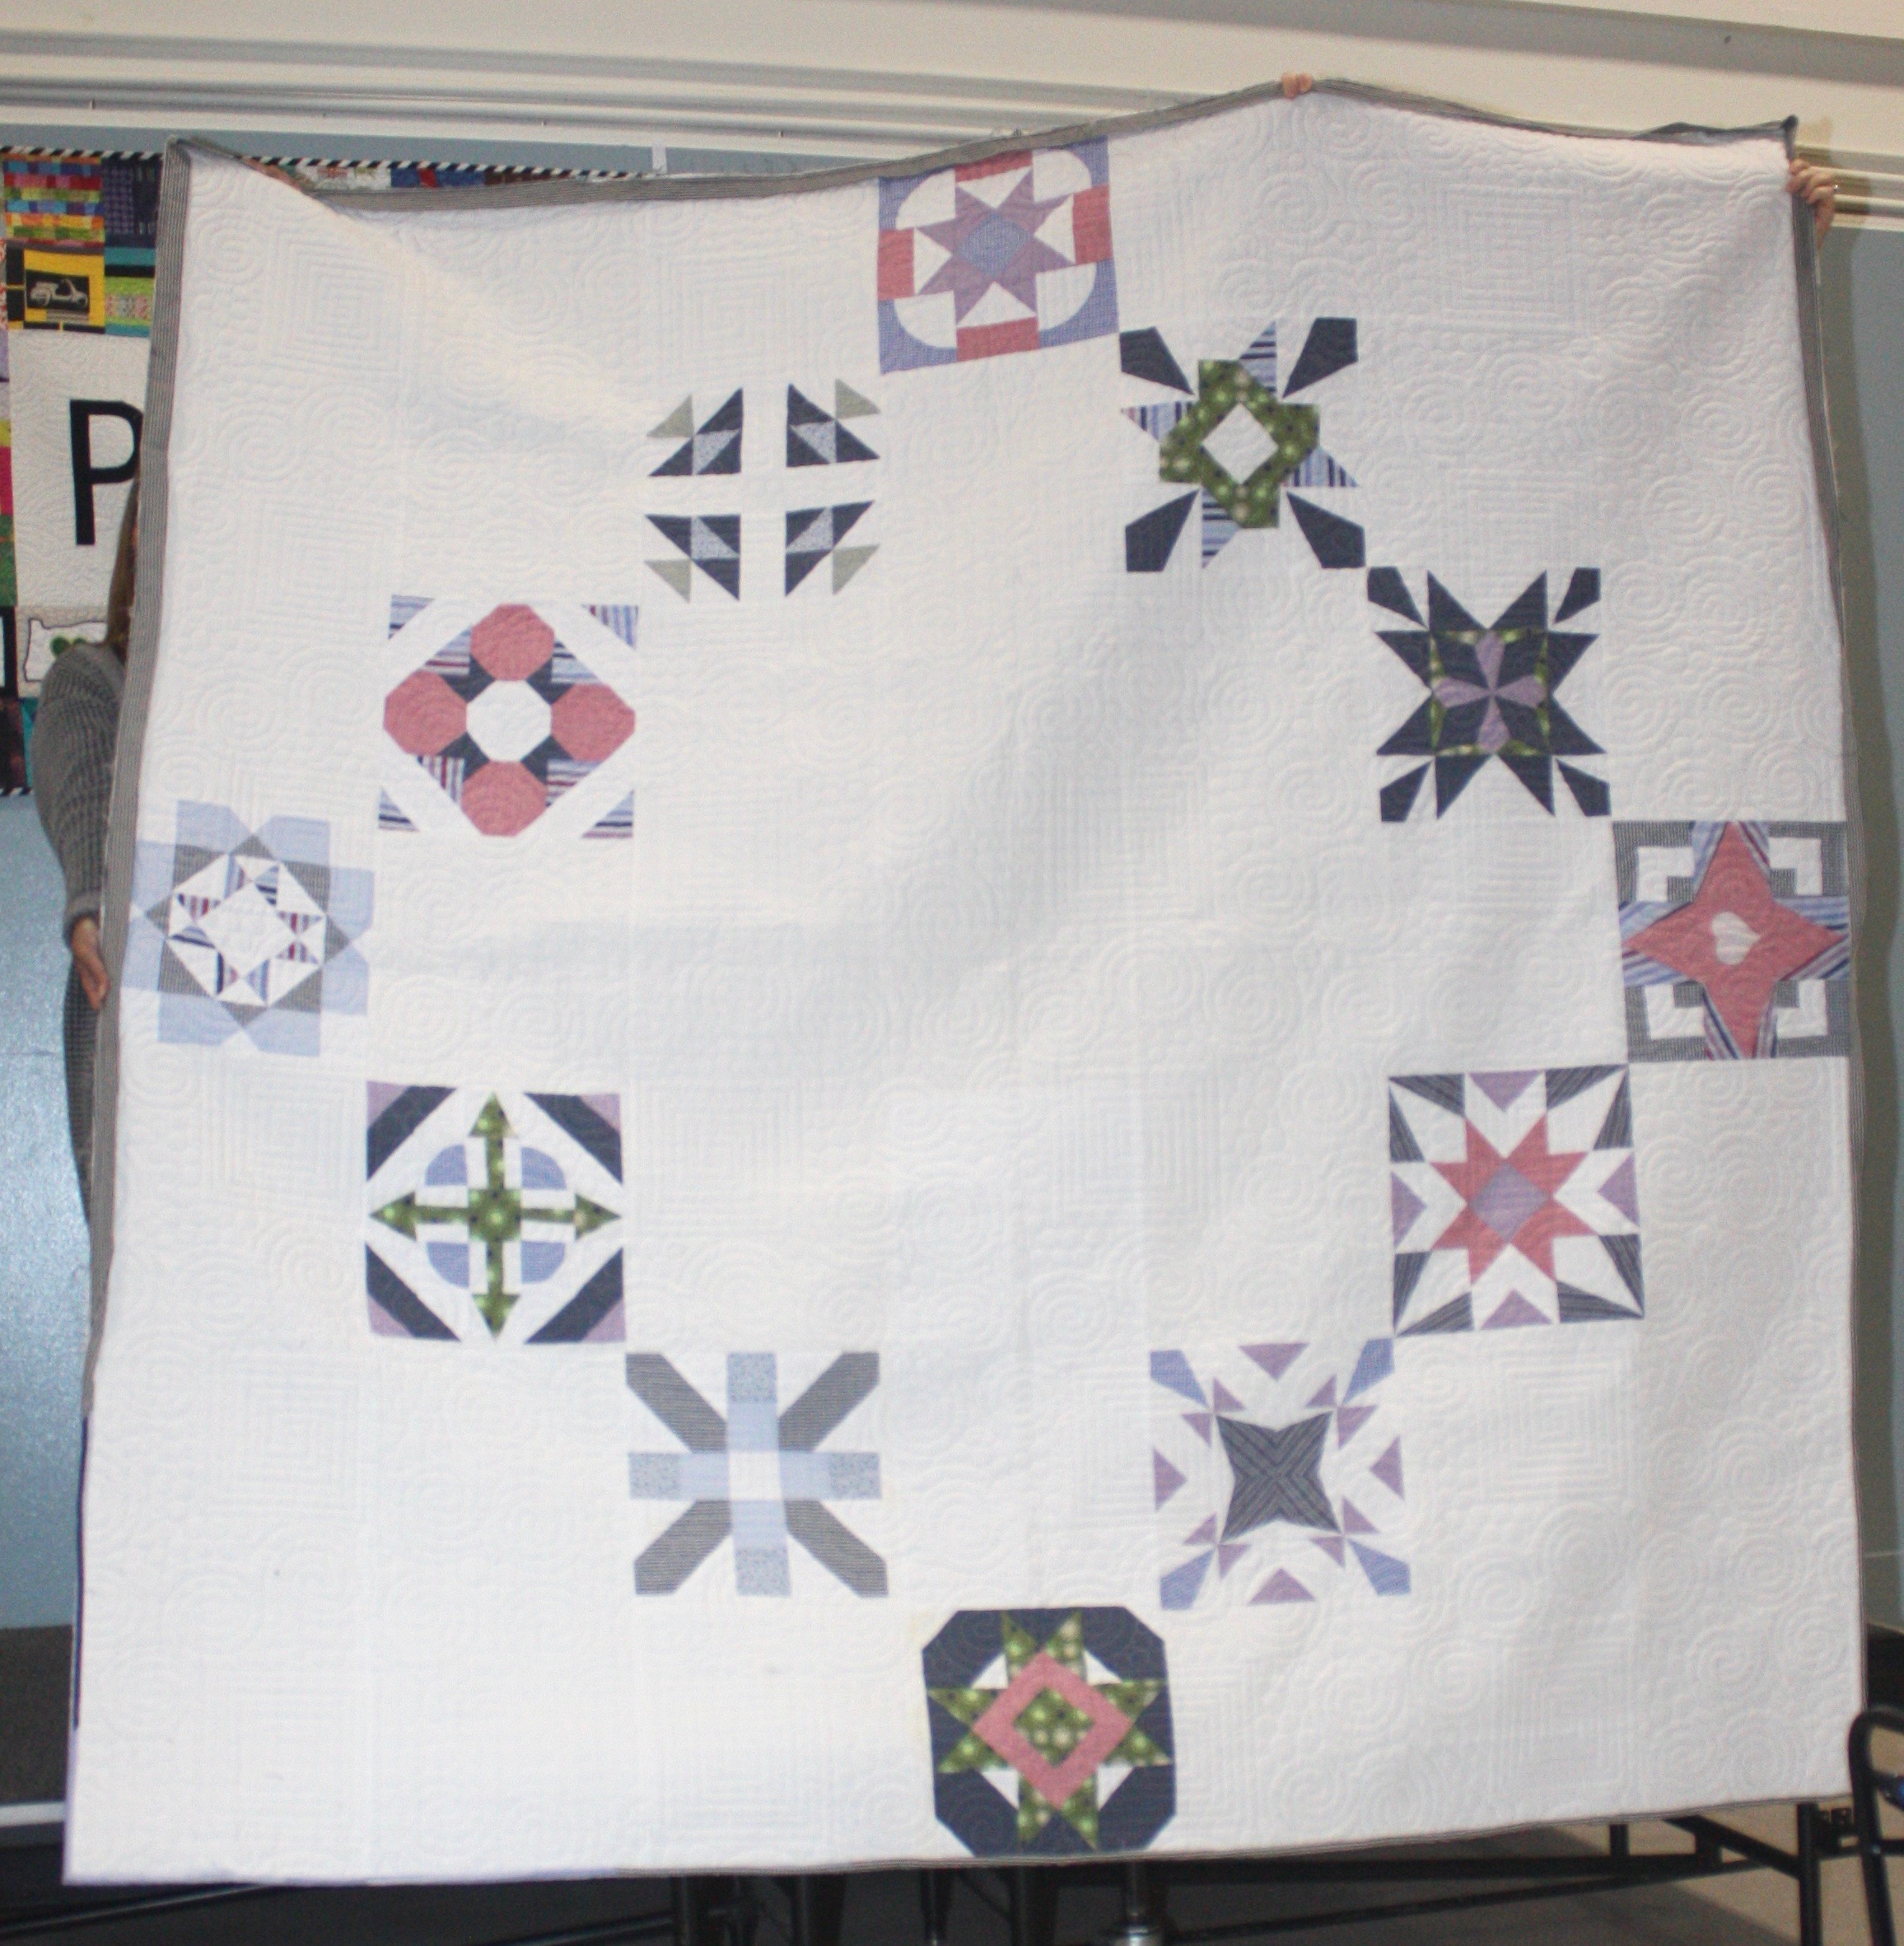 David's Memory Quilt by Angie Reat